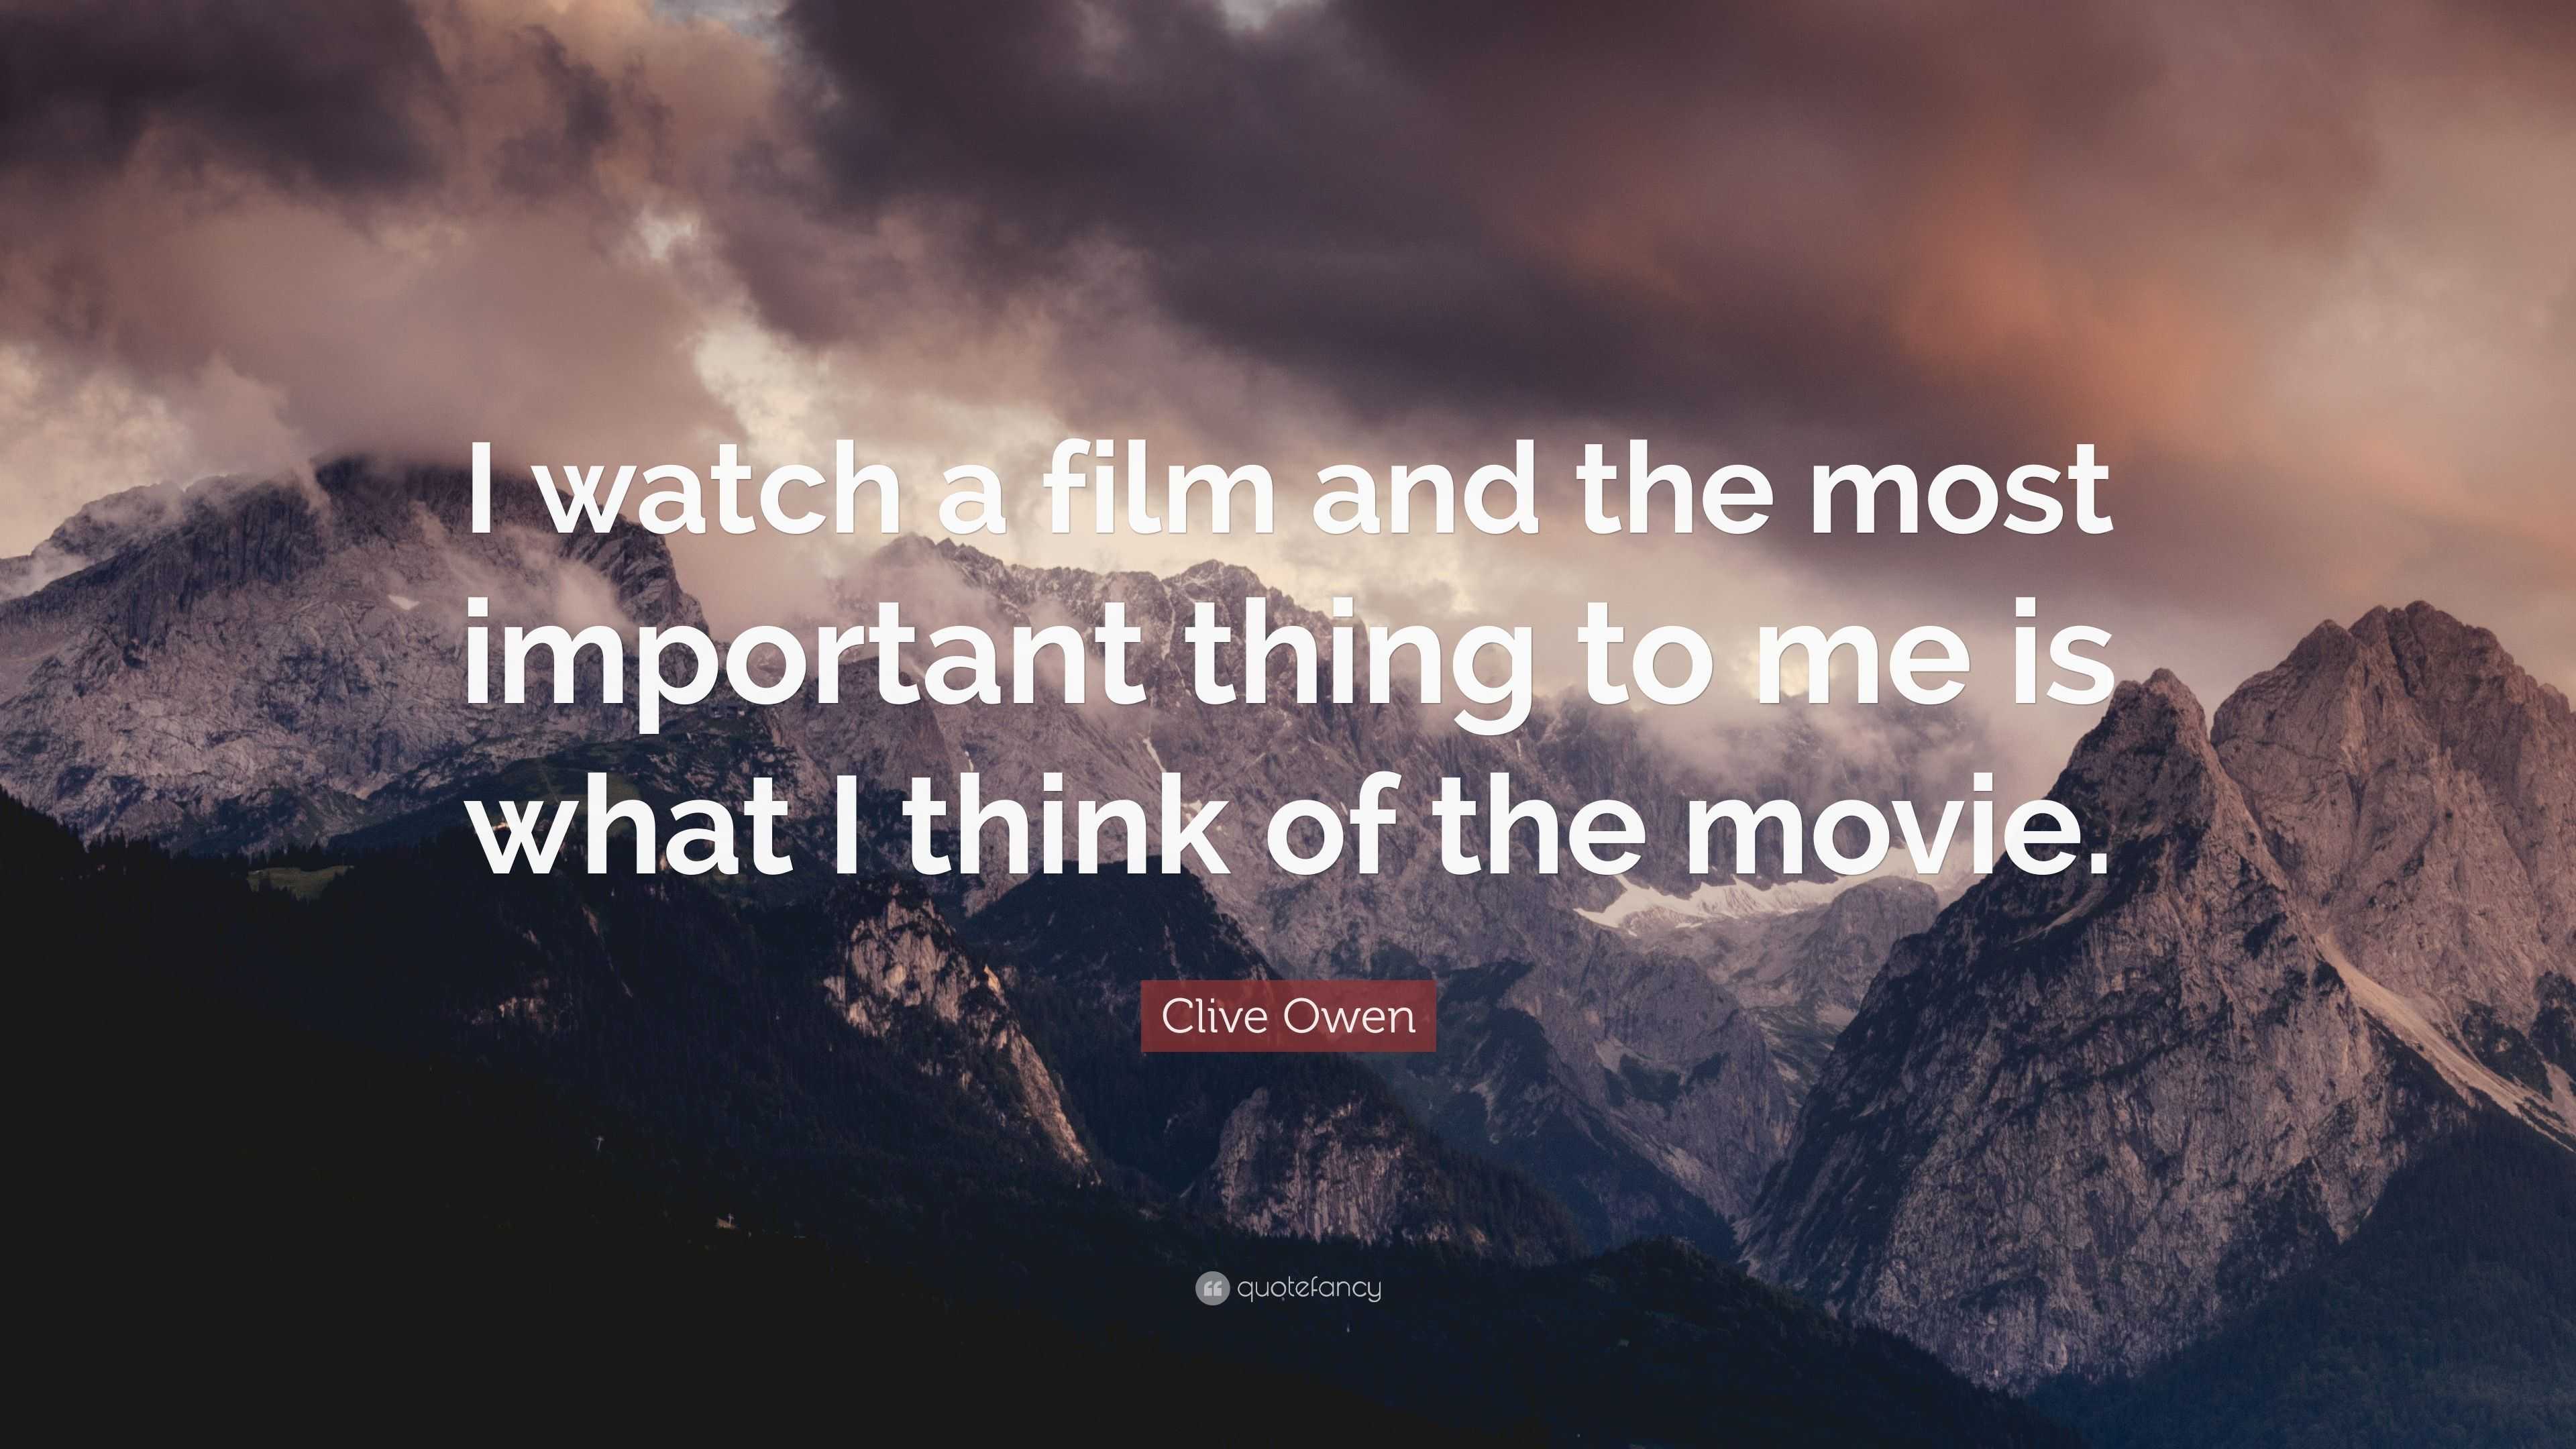 5582208 Clive Owen Quote I watch a film and the most important thing to me